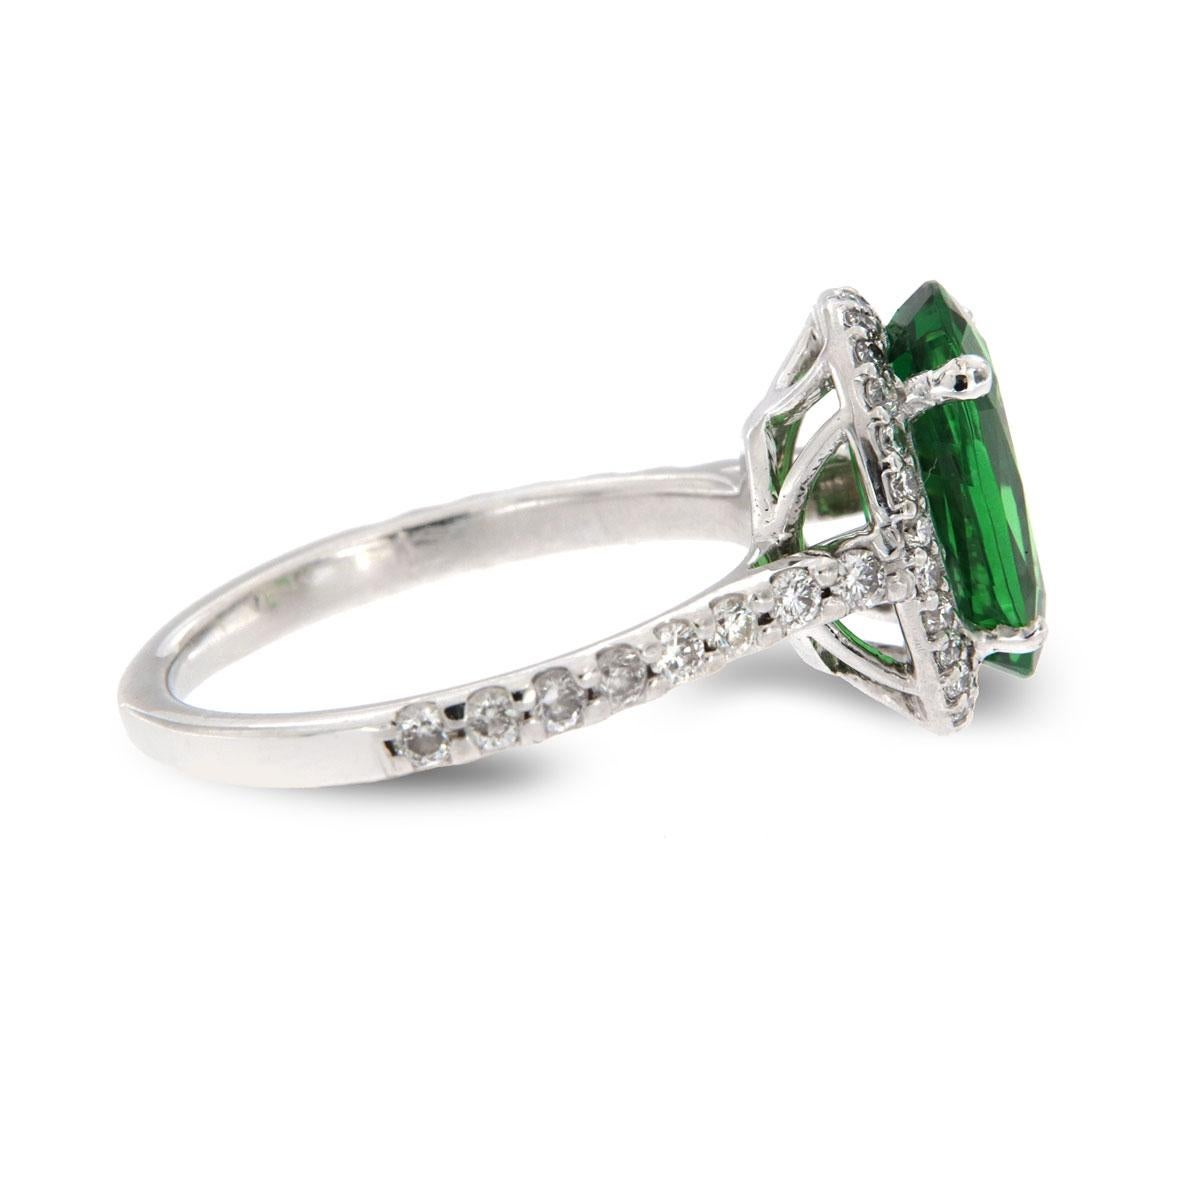 From our signature Gemstones collection of exquisite red carpet pieces, this handcrafted 18k White gold ring is centering a Top Quality Oval shape 2.86 Carat green Tsavorite GIA Certificate 5202148734 in premium luster encircled by a halo of